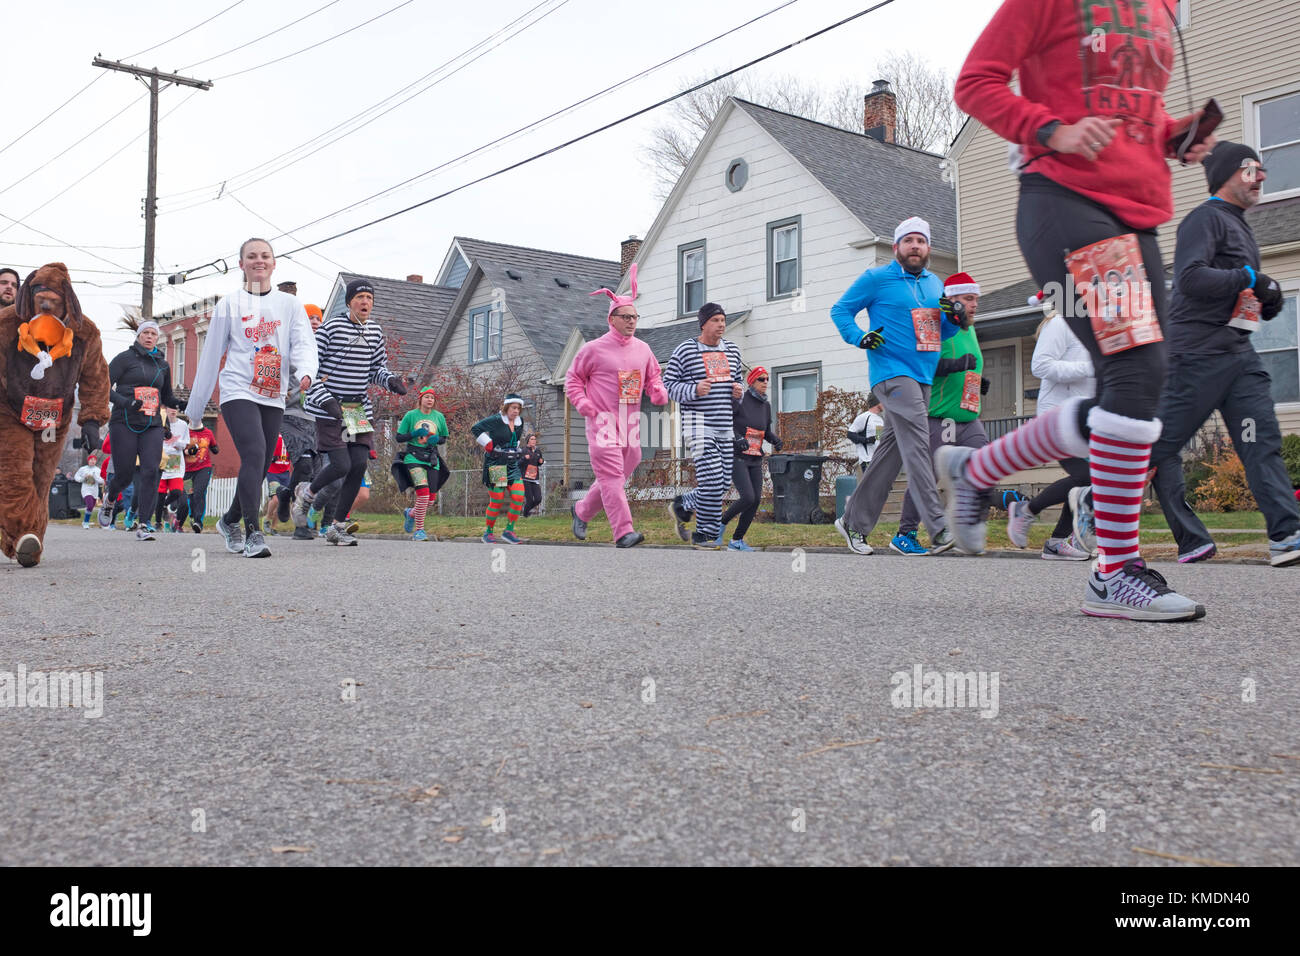 The 2017 annual 'A Christmas Story' 5k/10k fun run makes its way through the streets near downtown Cleveland, Ohio, USA. Stock Photo